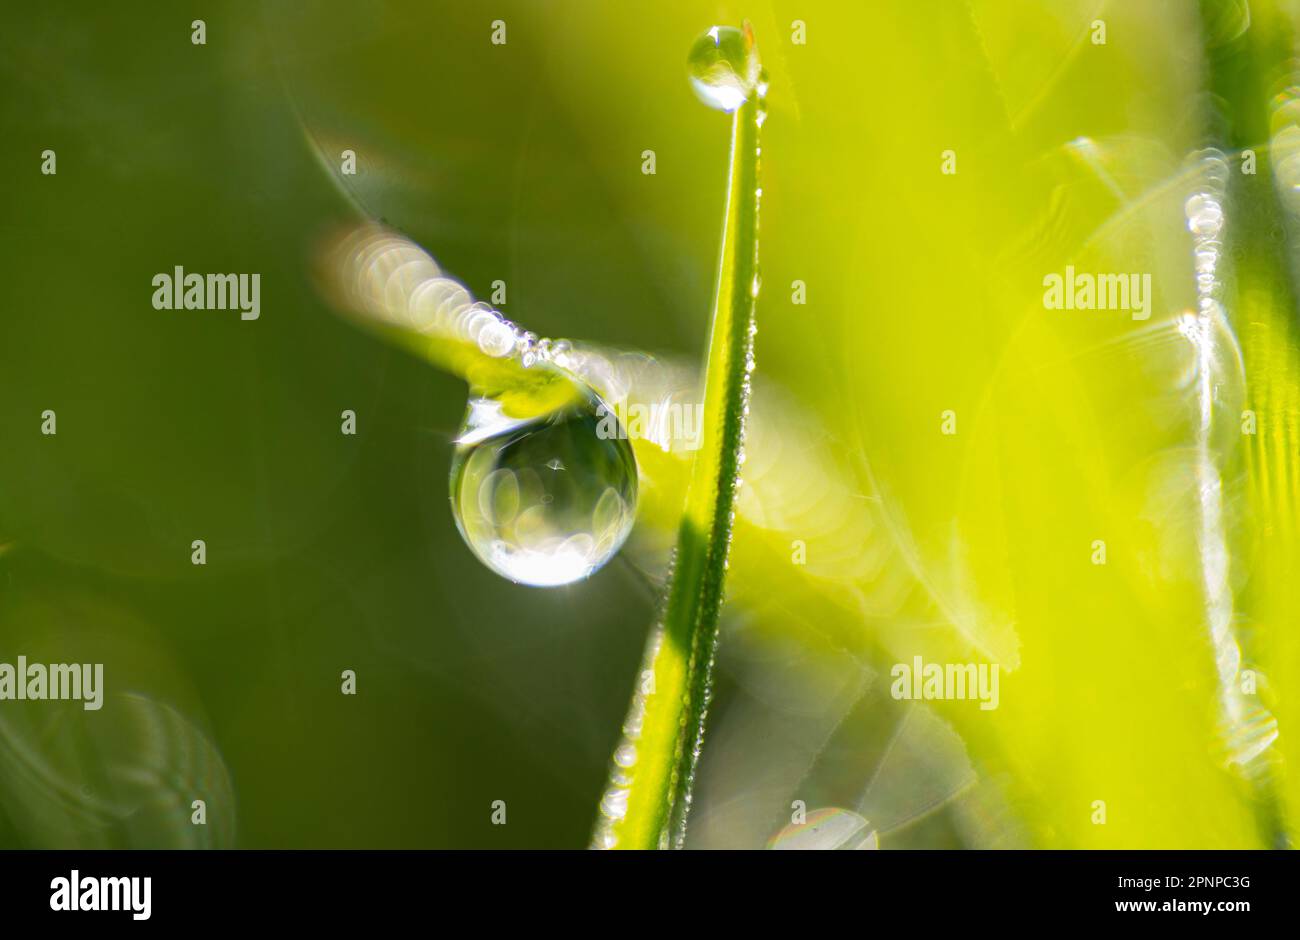 Macro photographs of dew on grass, drips of water catching the early morning light on the green undergrowth of a forest on a spring morning Stock Photo